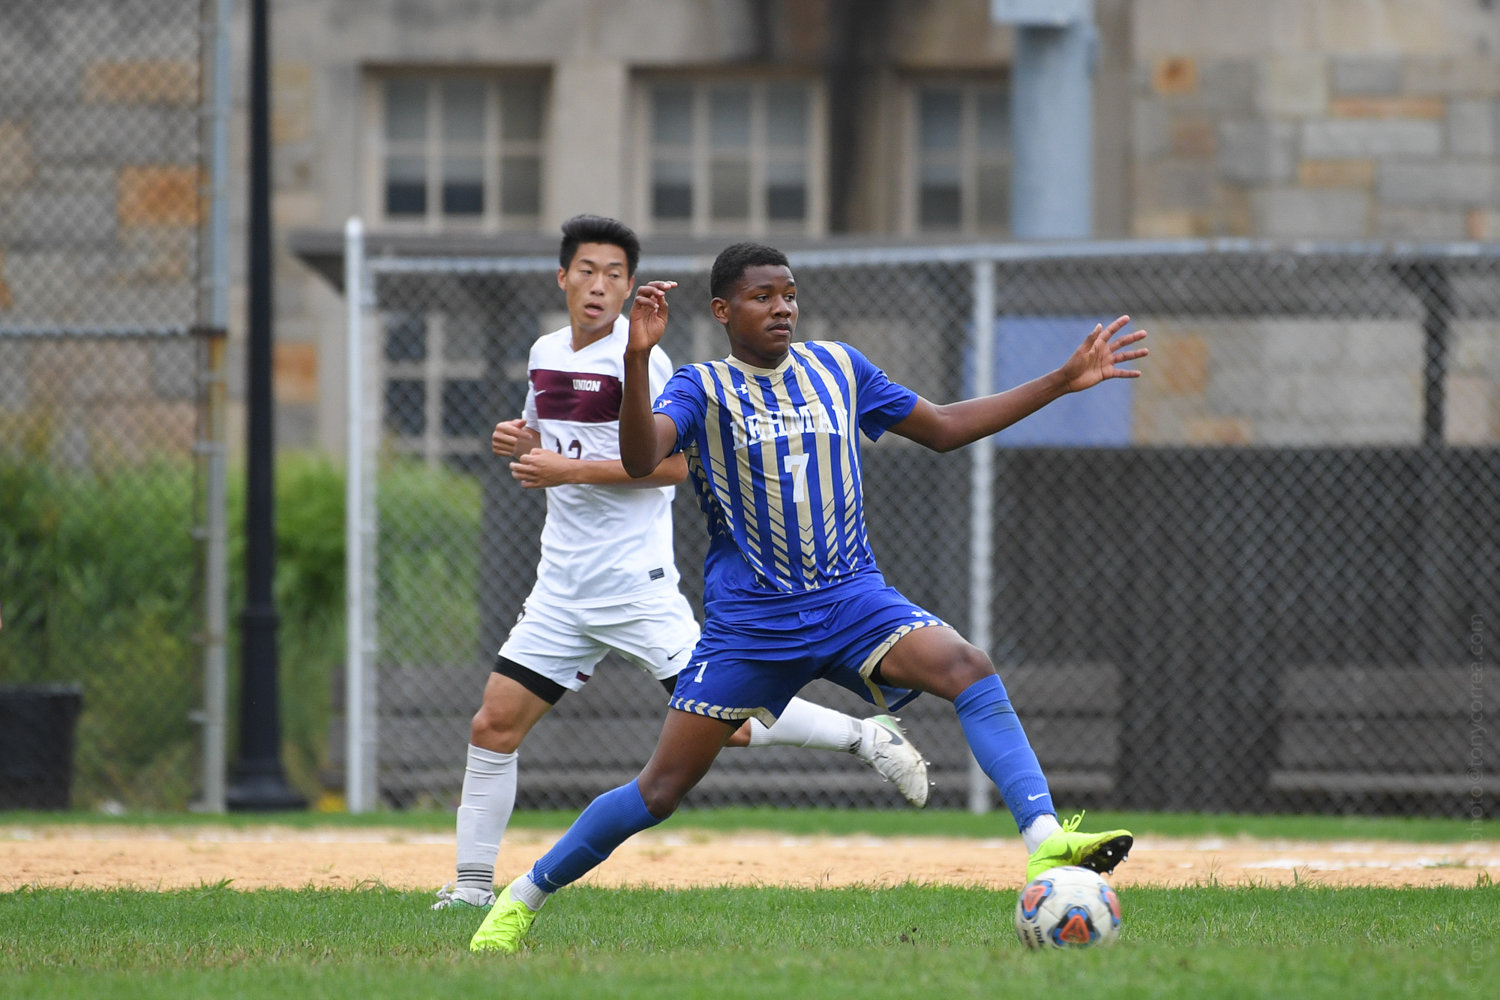 Mubarak Ouro’s goal gave Lehman an early lead over John Jay in the CUNYAC semifinals last week. But the Bloodhounds rallied to win and move on to the championship game.